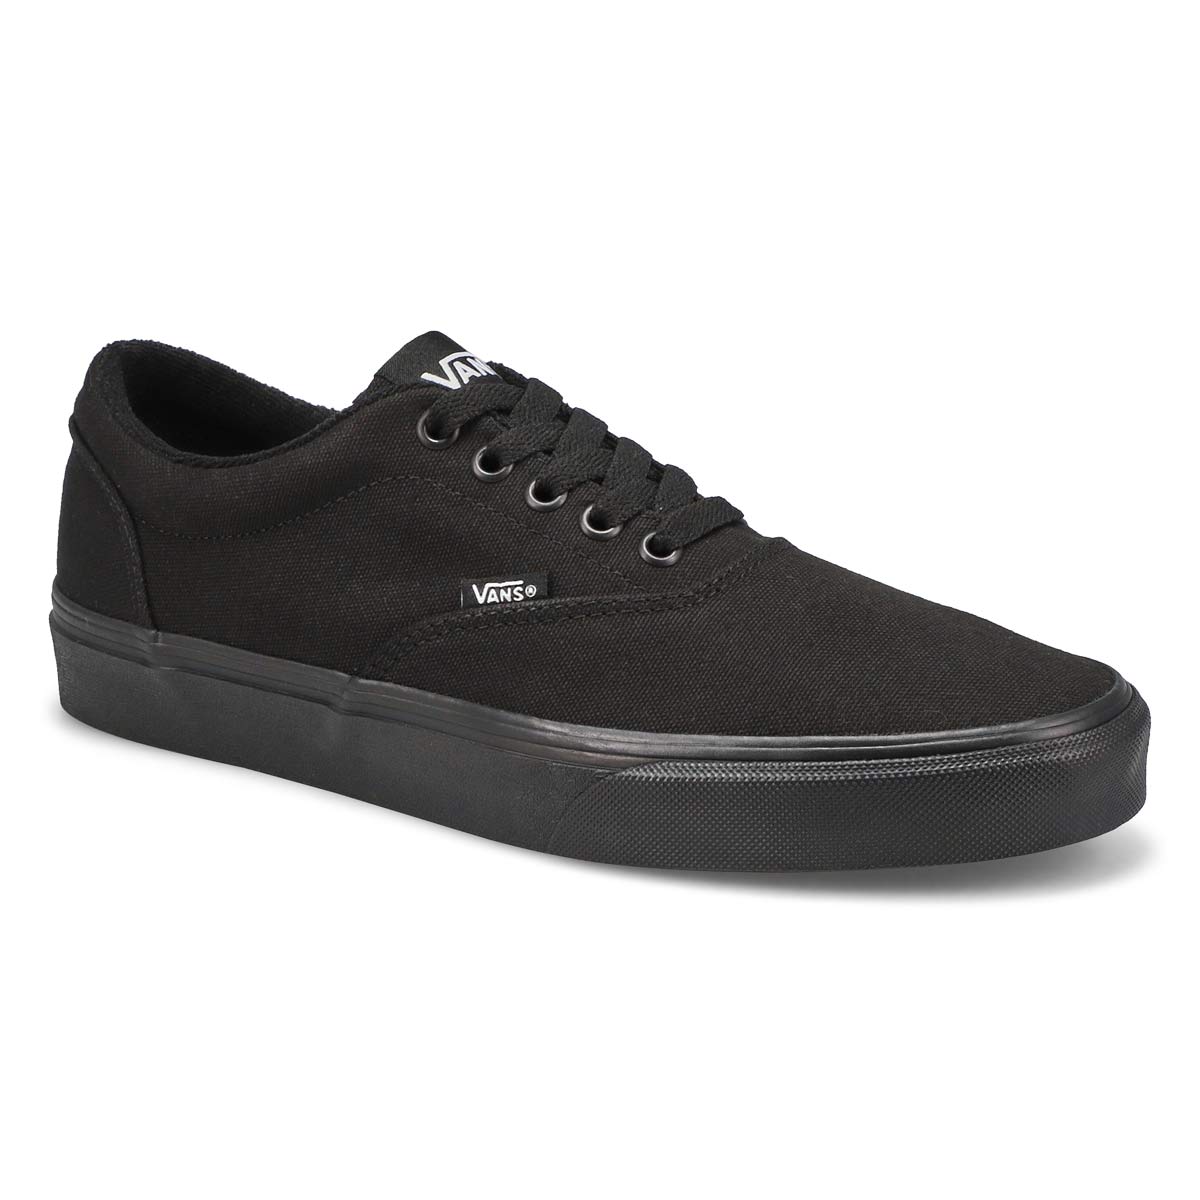 Vans Men's Doheny Lace Up Sneaker - Black/Whi | SoftMoc.com